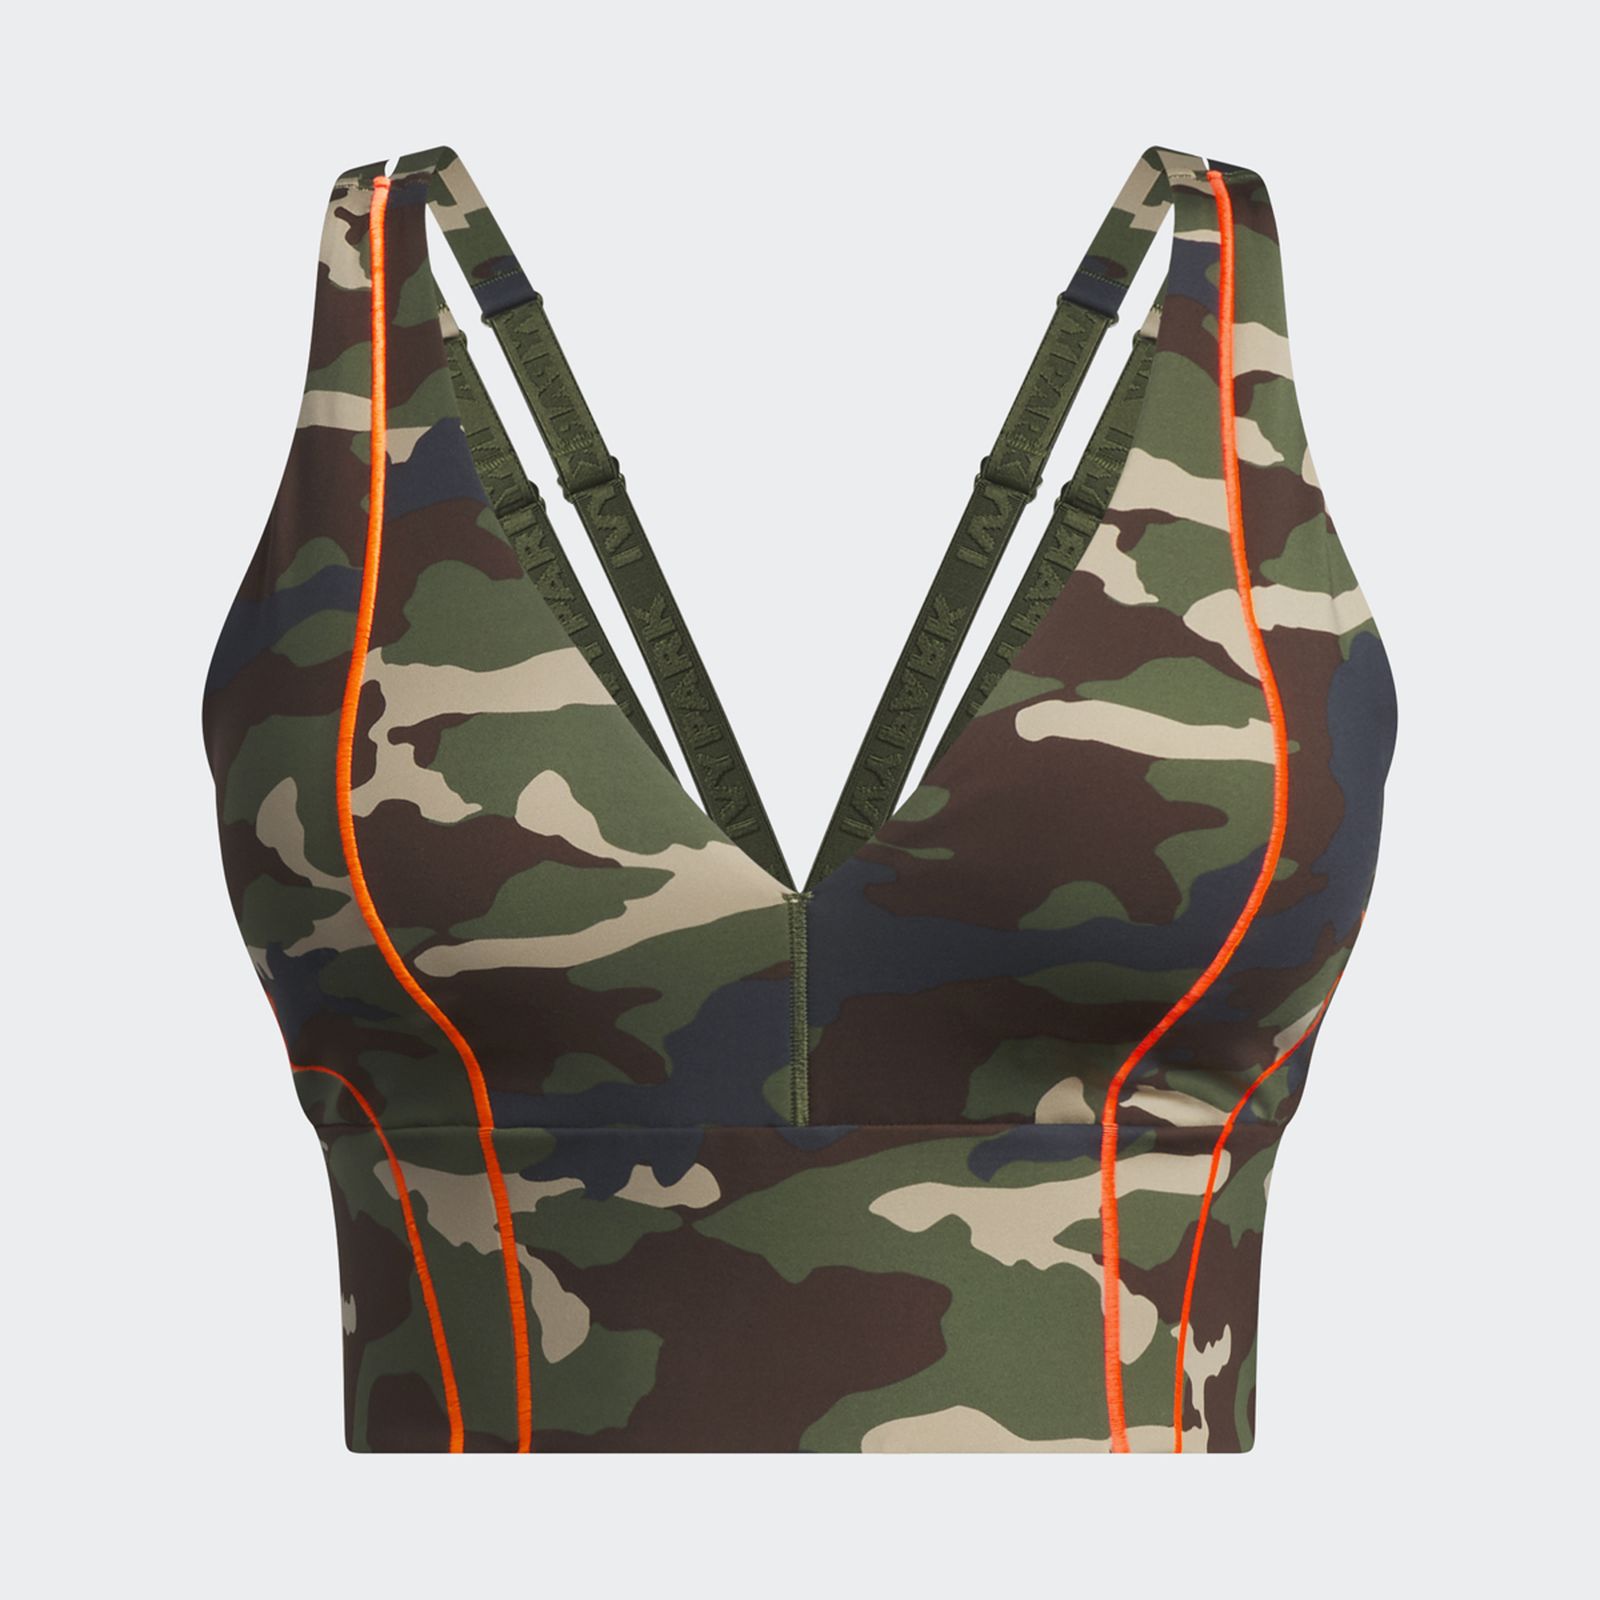 ivy-park-adidas-trail-collection-21